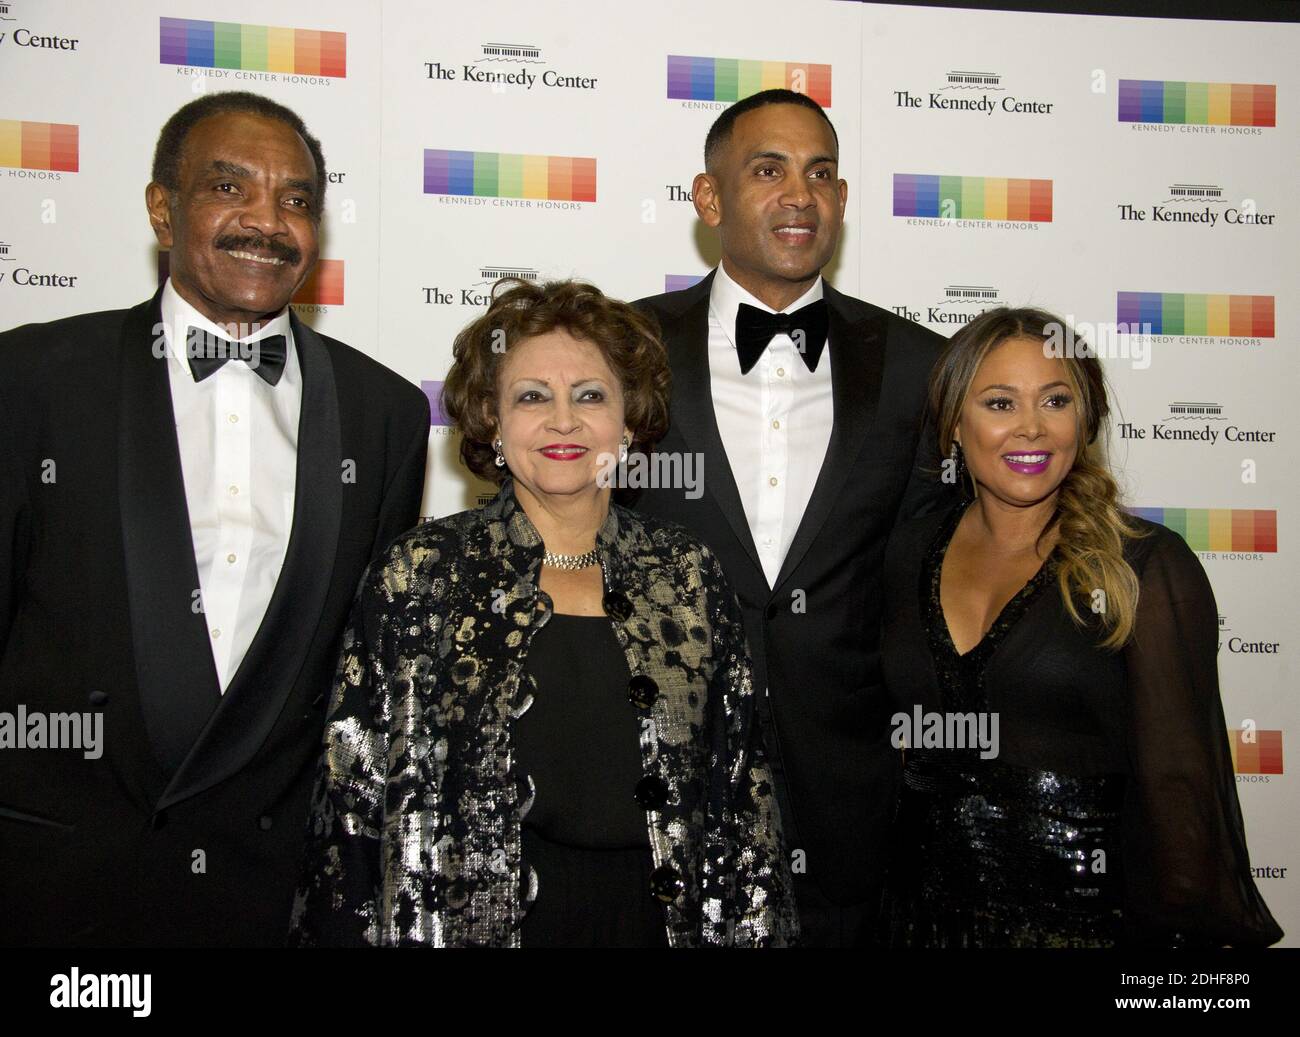 From left to right: Calvin Hill, wife Janet, Grant Hill and wife Tamia, arrive for the formal Artist's Dinner honoring the recipients of the 40th Annual Kennedy Center Honors hosted by United States Secretary of State Rex Tillerson at the US Department of State in Washington, DC, USA, on Saturday, December 2, 2017. The 2017 honorees are: American dancer and choreographer Carmen de Lavallade; Cuban American singer-songwriter and actress Gloria Estefan; American hip hop artist and entertainment icon LL COOL J; American television writer and producer Norman Lear; and American musician and record Stock Photo